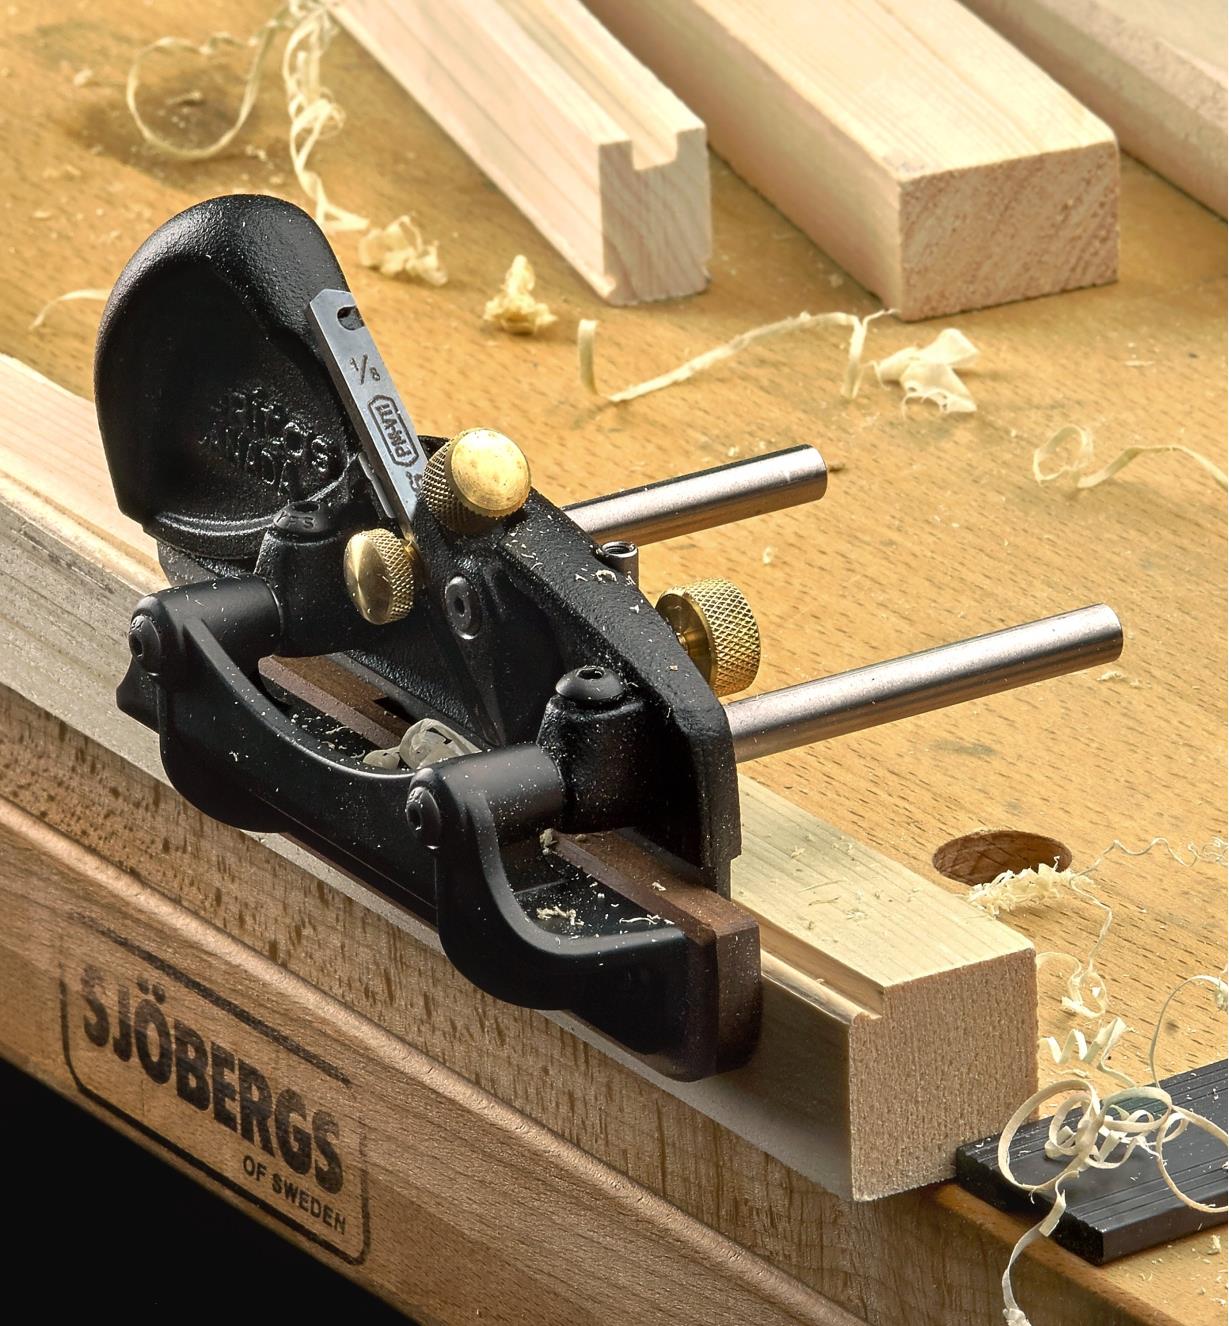 50K56.05, Handtools and accesories > Veritas Tools > Workbench Accessories  > Wile Plane Hammer by